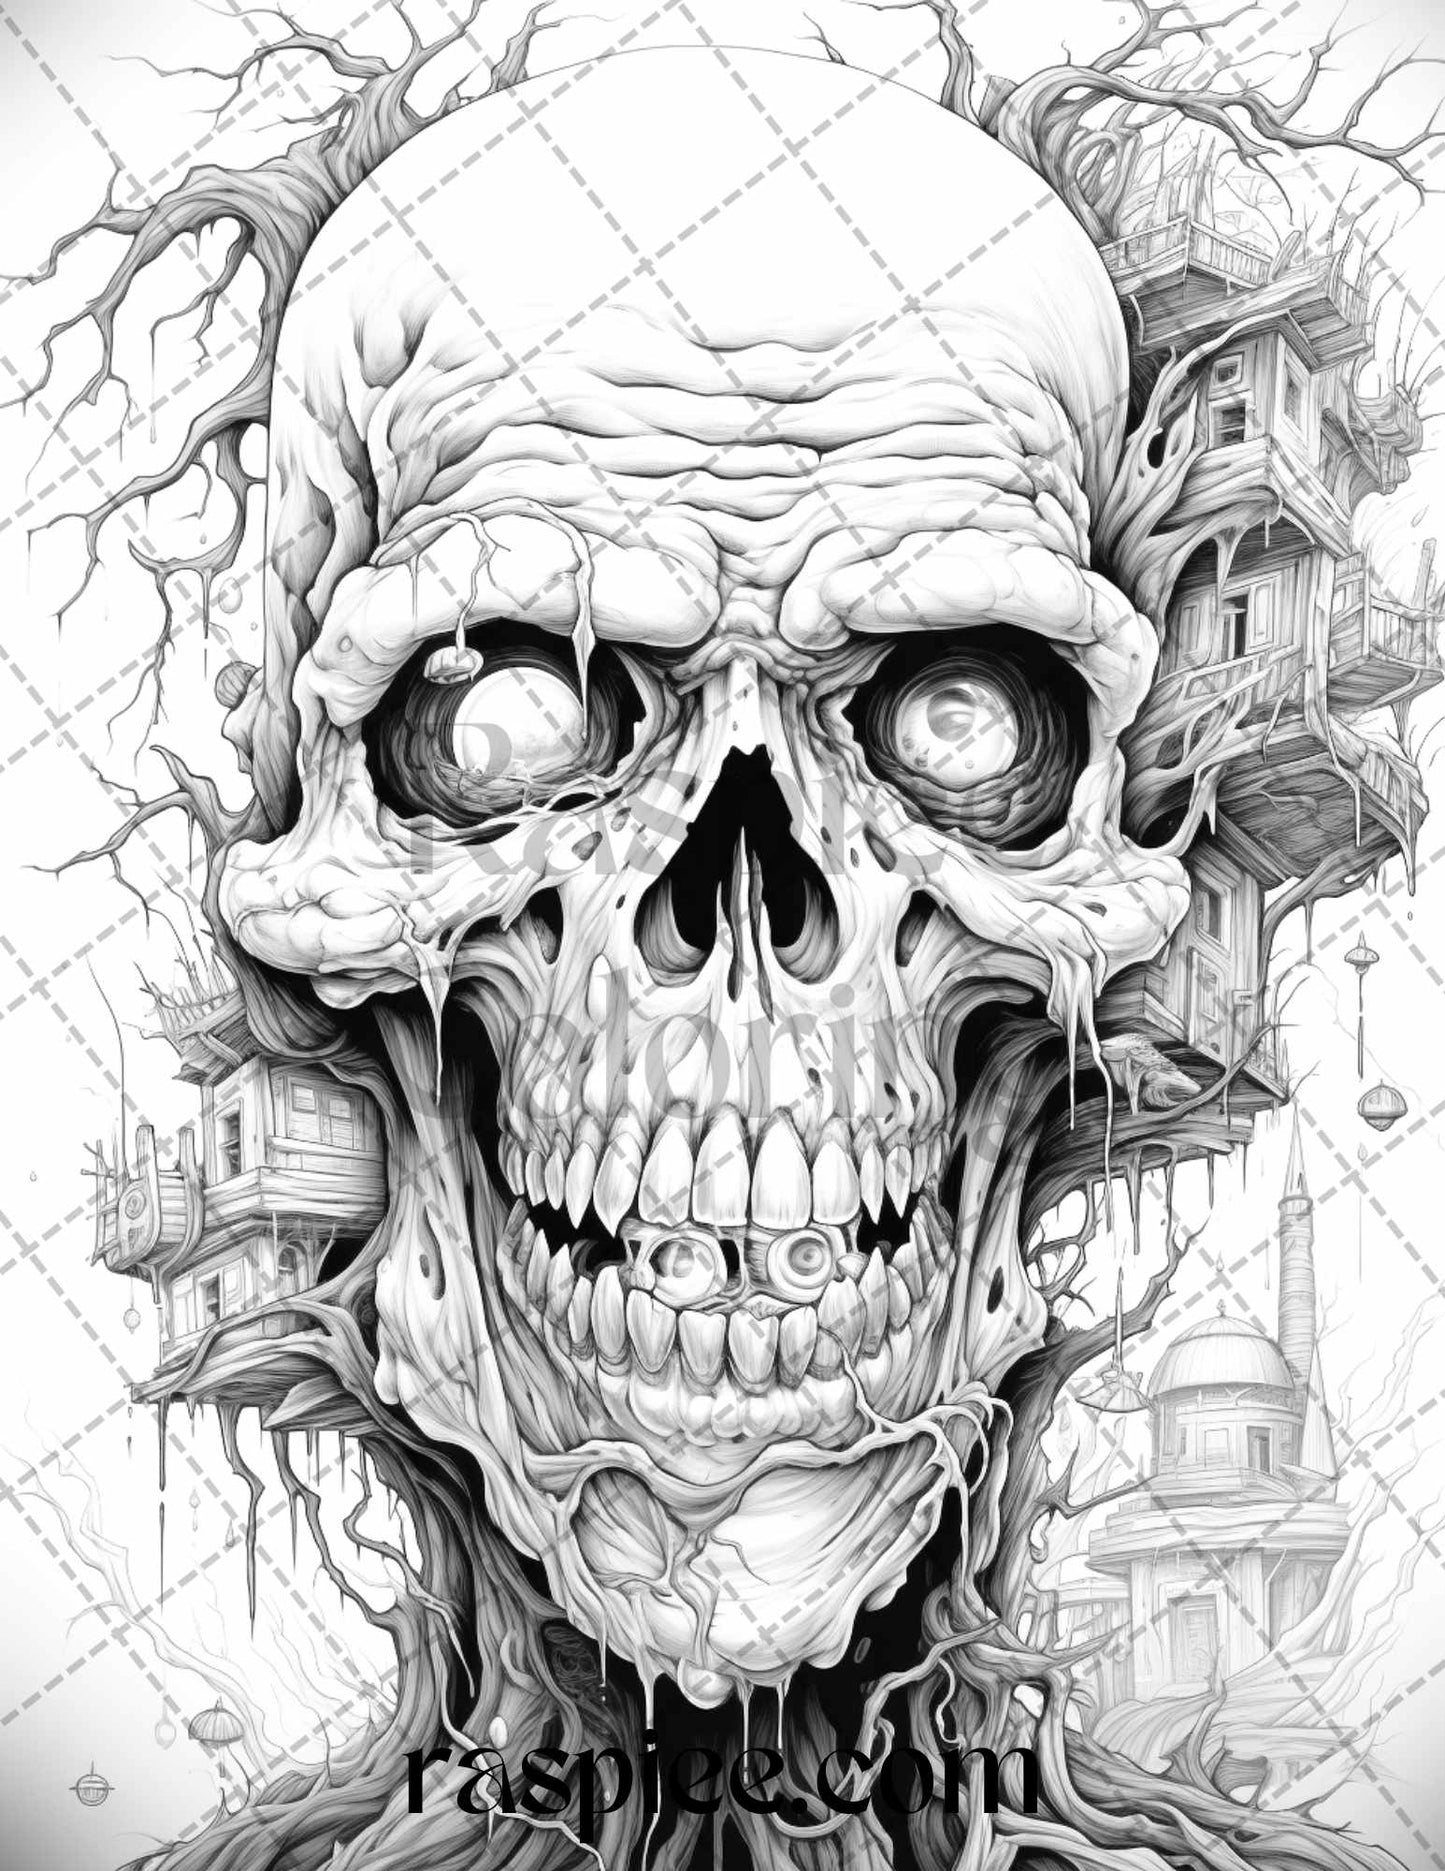 60 Halloween Nightmare Grayscale Coloring Pages Printable for Adults, PDF File Instant Download